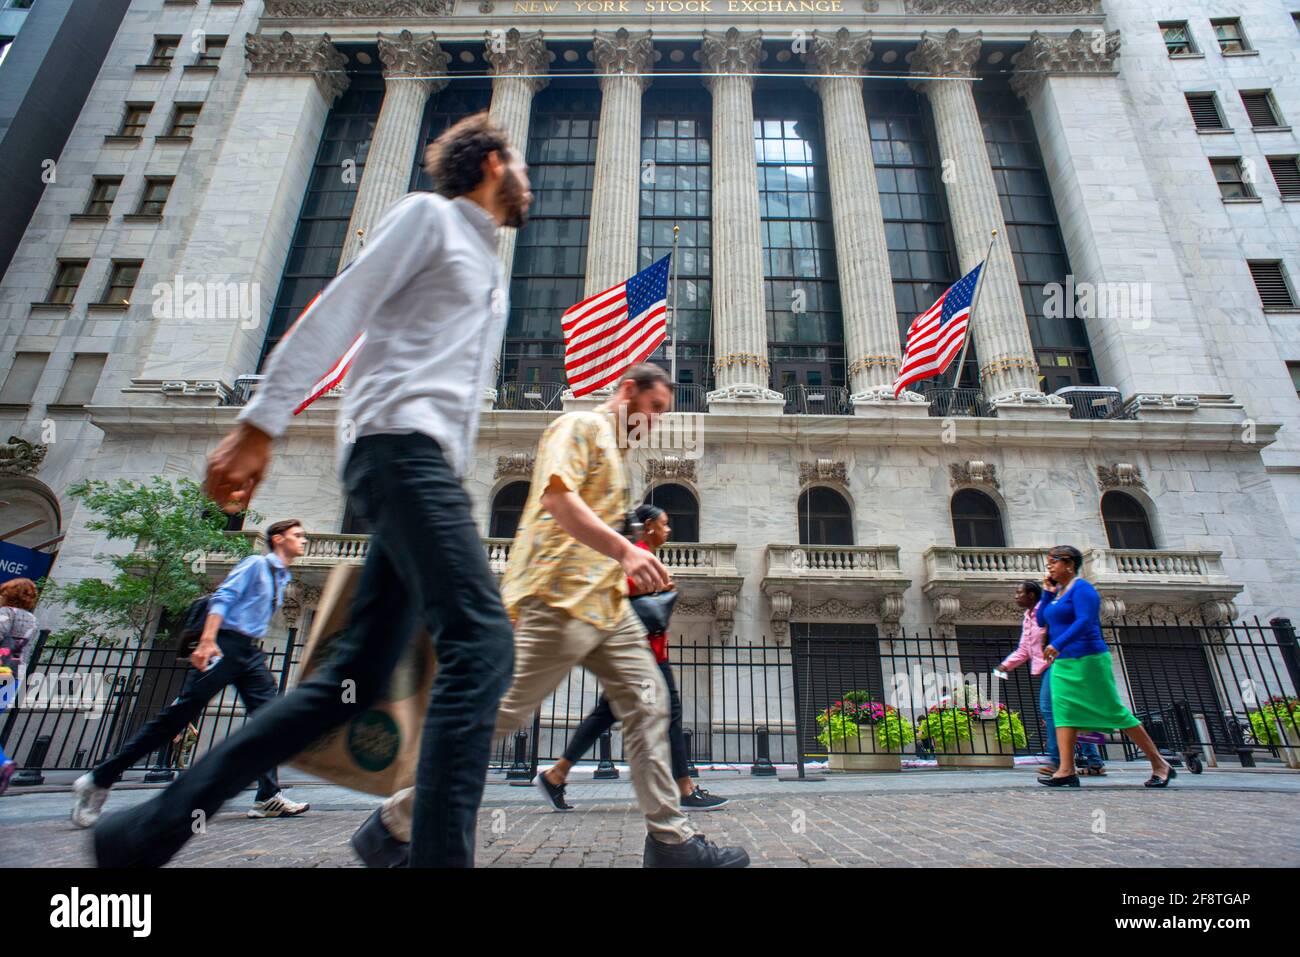 The New York Stock Exchange is an American stock exchange located at 11 Wall Street, Lower Manhattan, New York City.  	 The New York Stock Exchange (a Stock Photo